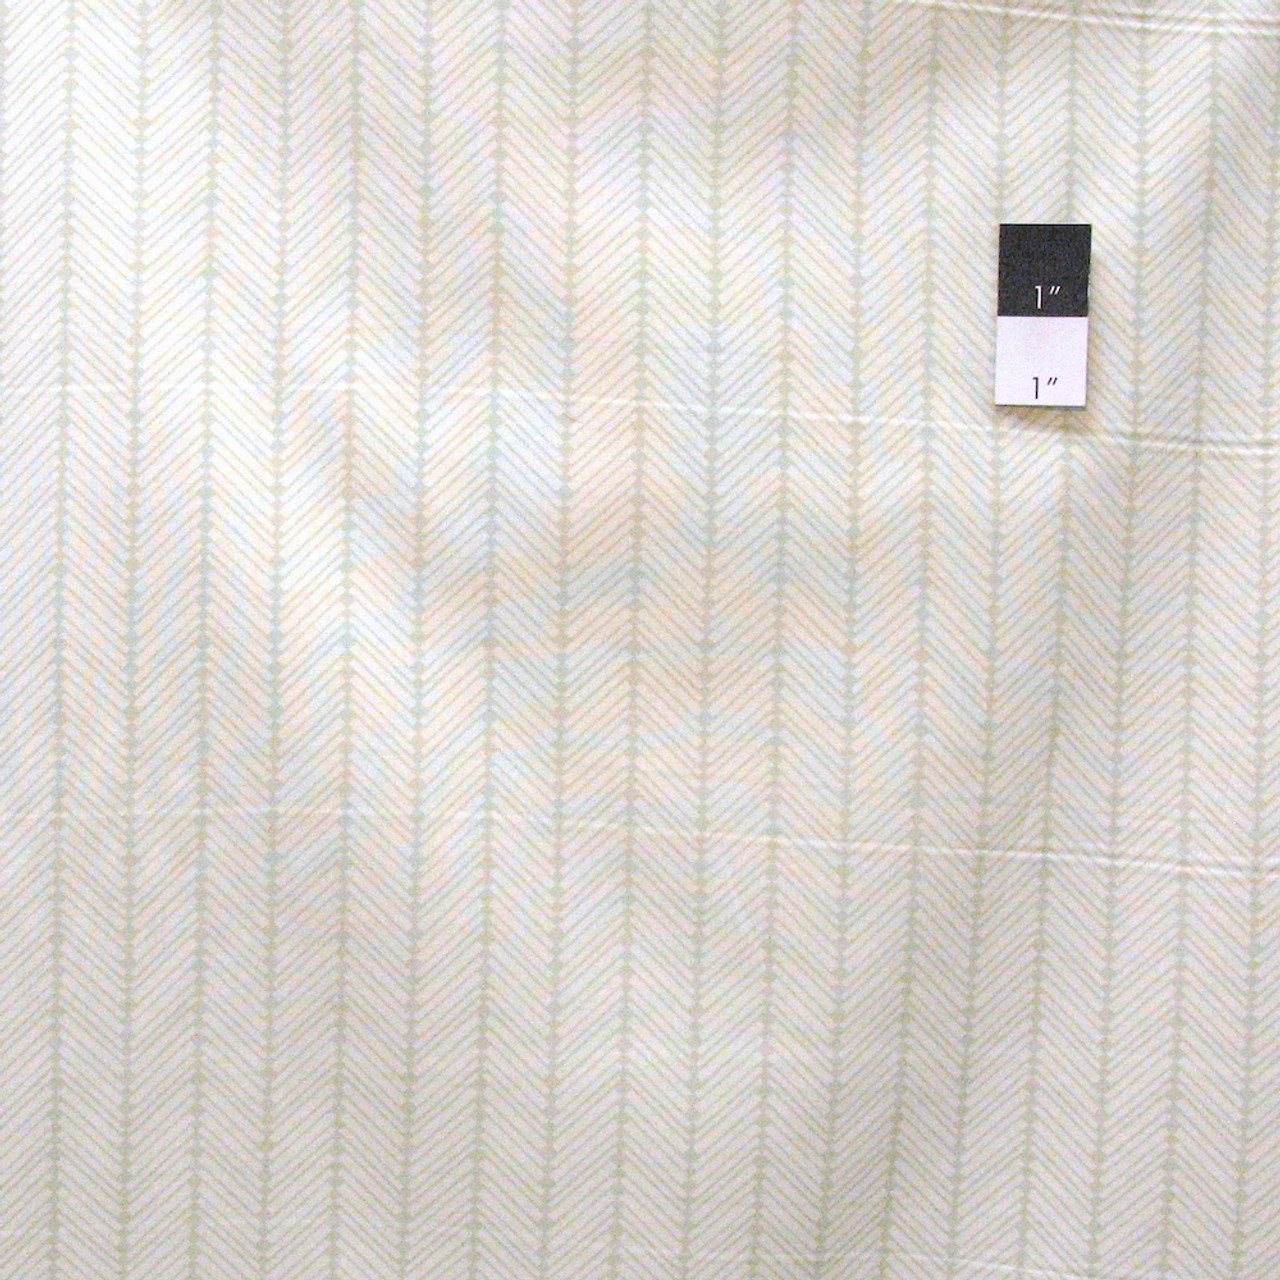 Heather Bailey True Colors PWTC038 Checkerbone Silver Cotton Fabric By The Yard